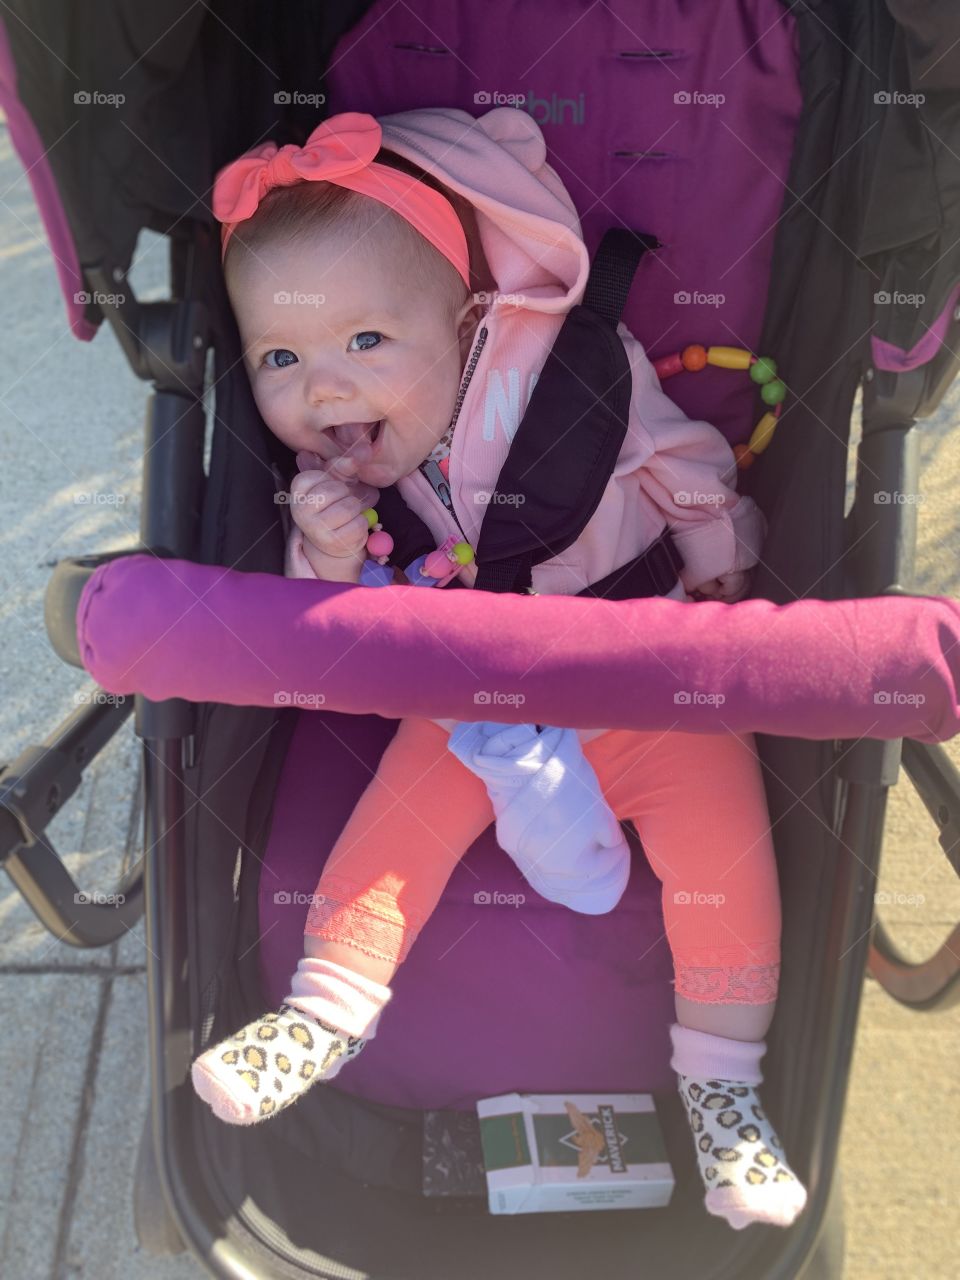 Freya was on a walk with me and posed for tons of pictures she has an amazing personality and is extremely photogenic!!! She’s 7 months and is the happiest baby I have ever seen. She never cries and is so well behaved it stuns me so we have fun!